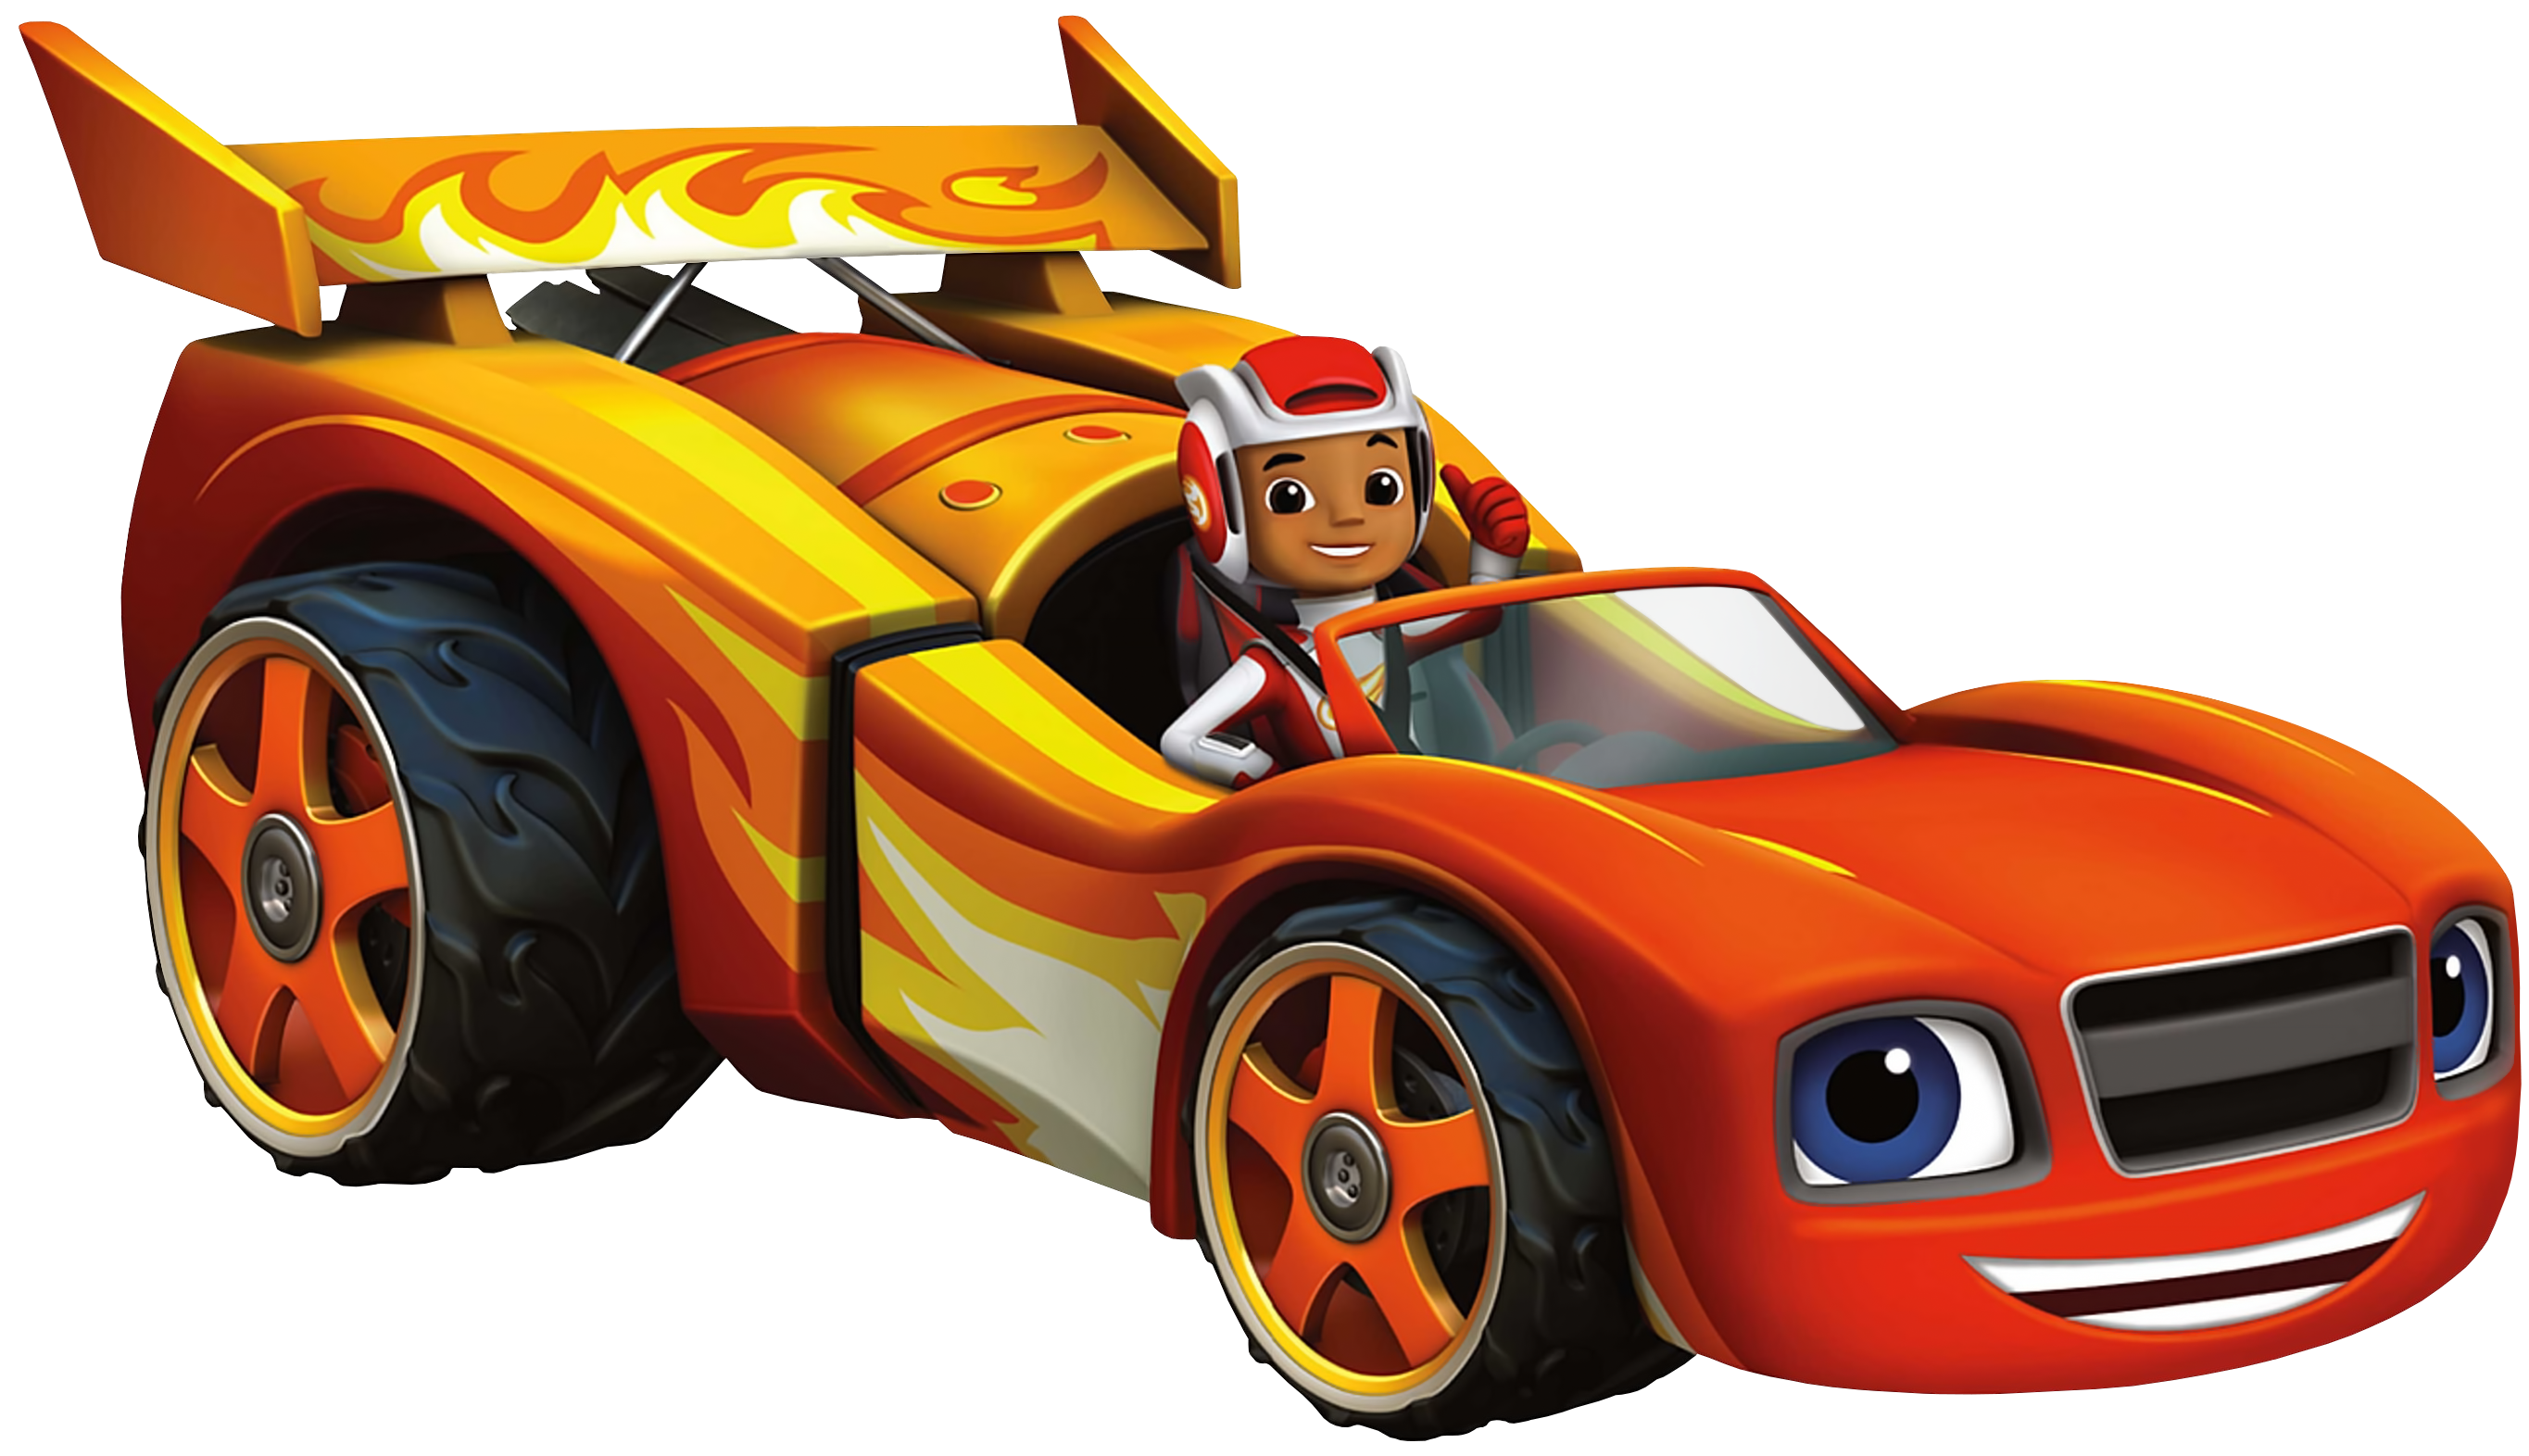 Blaze And Monster Machines png images